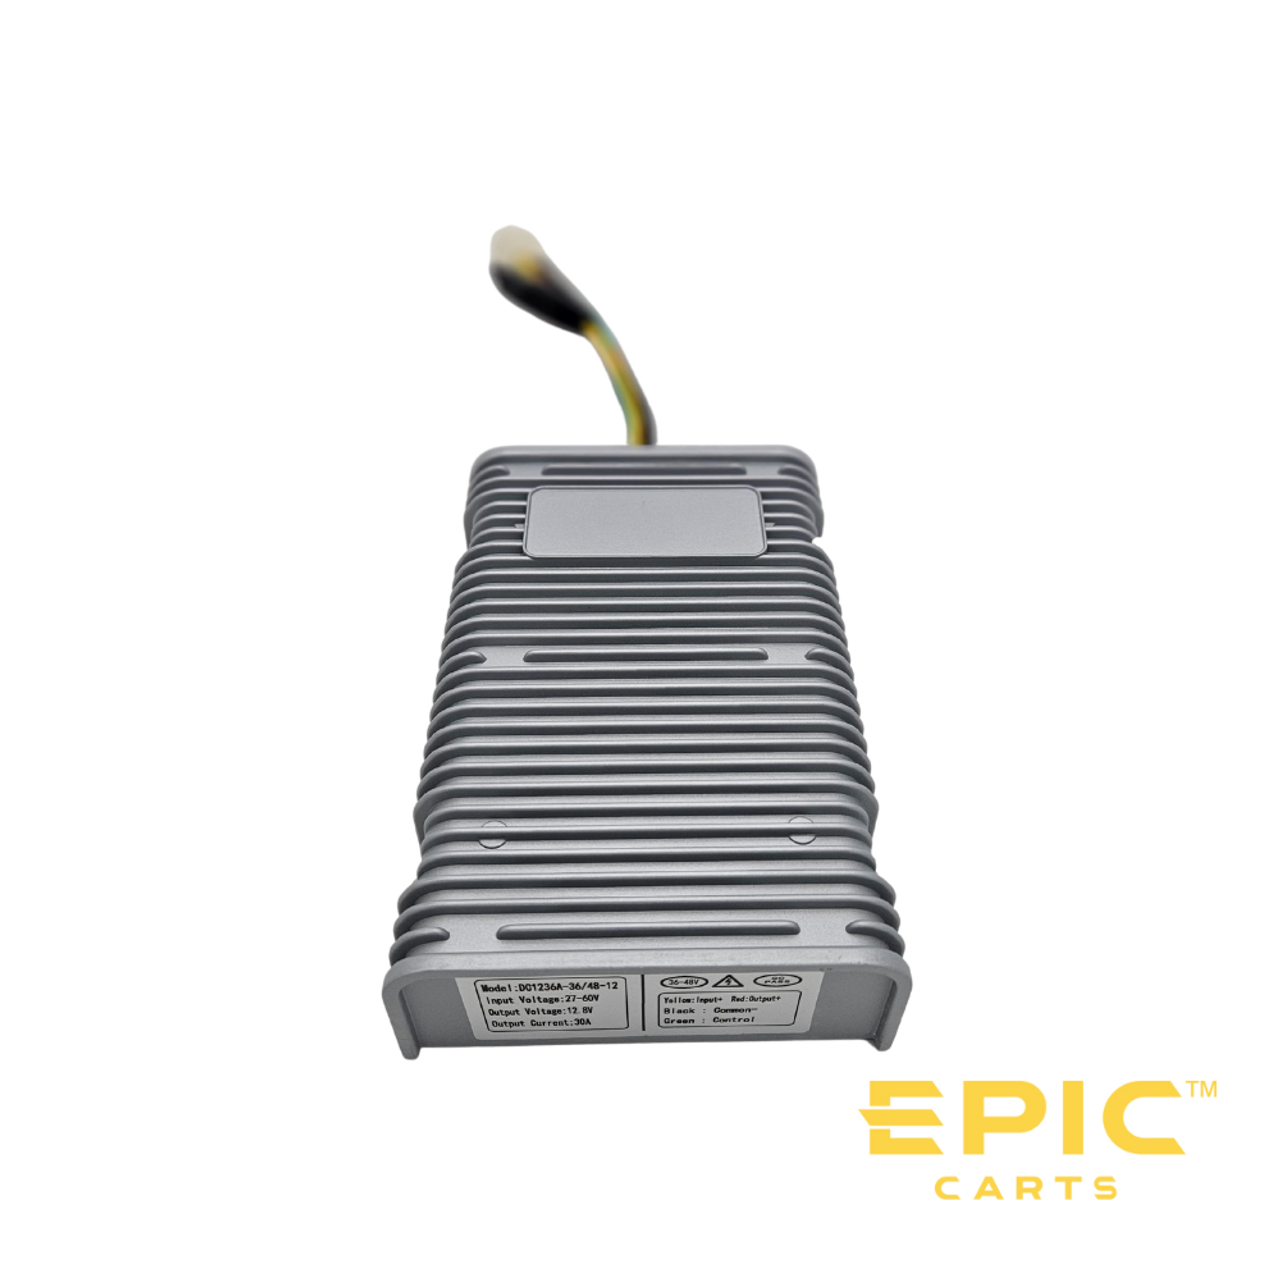 DC Converter for EPIC Golf Carts, ELE-EP209, 3202060017